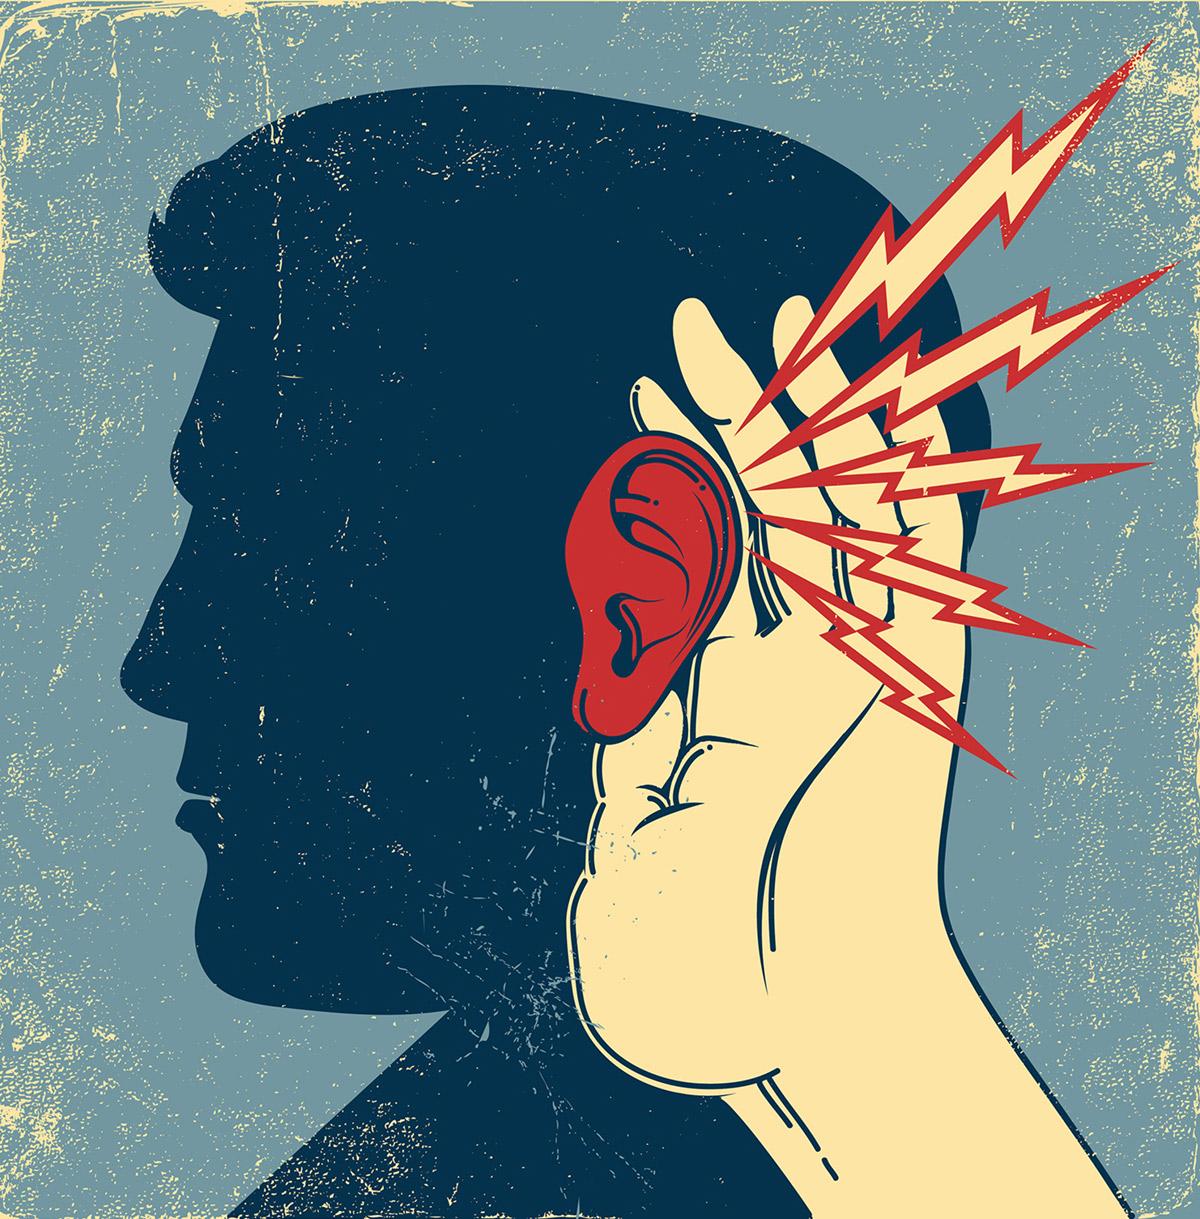 starkly contrasted silhouette of head, red ear hand at ear, electric blots pointed at ear